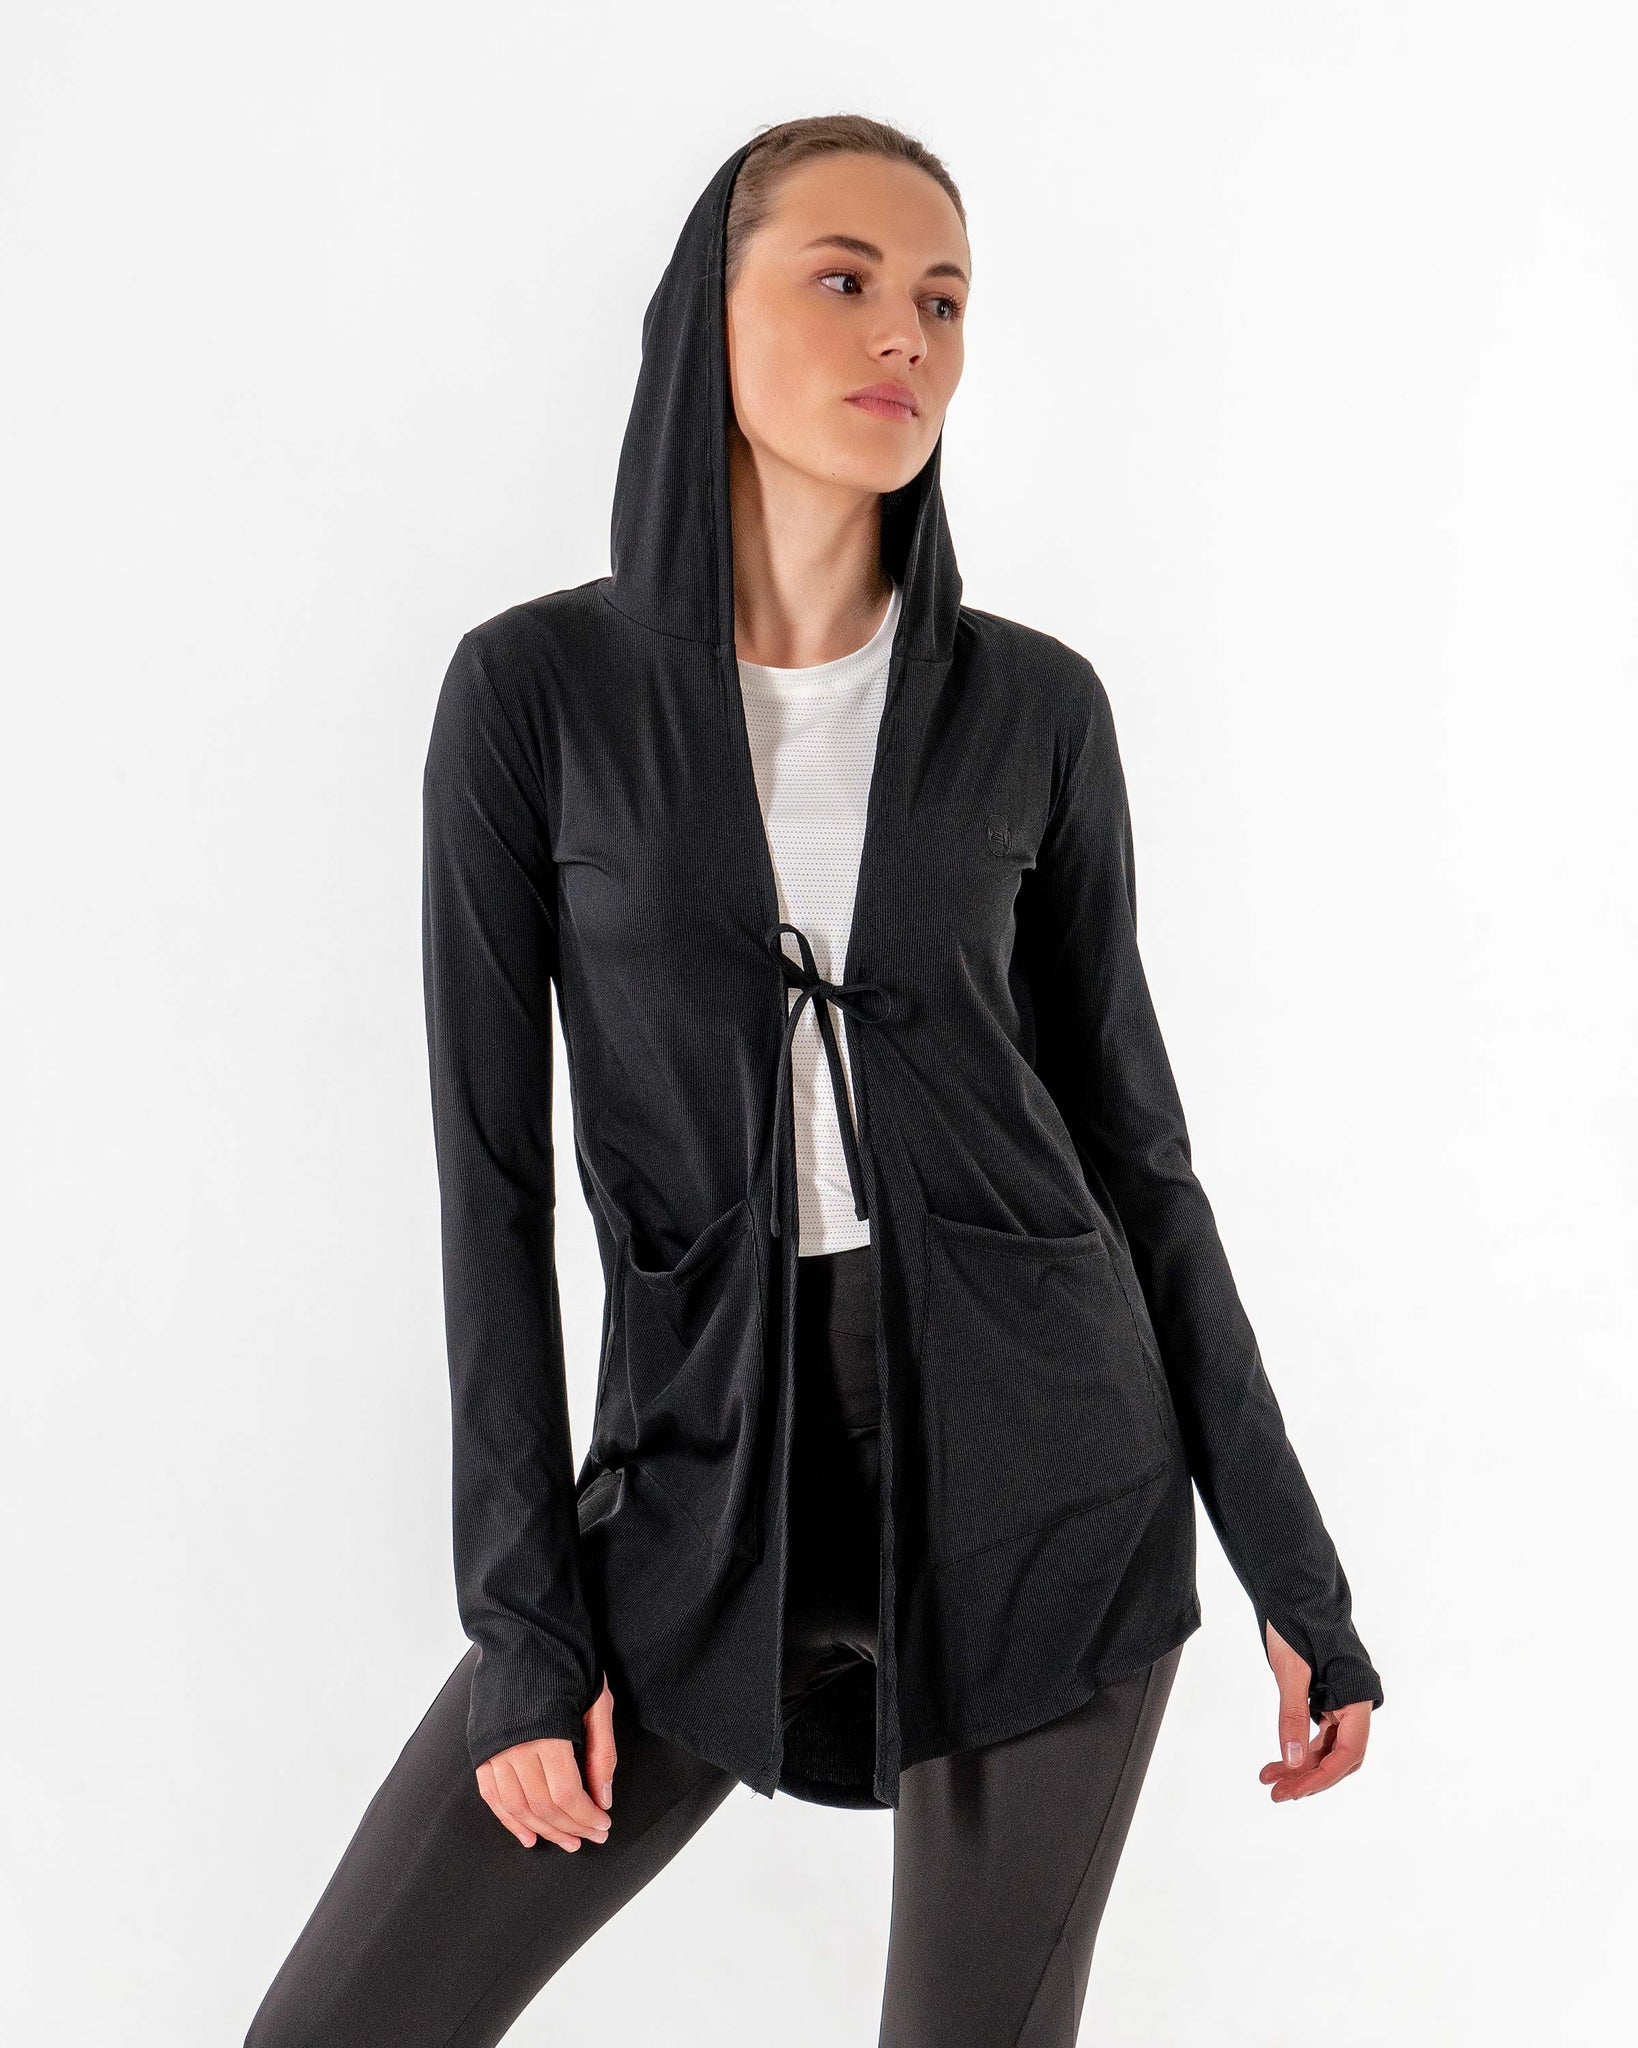 Move It Cardigan in black by Veil Garments. Modest activewear collection.